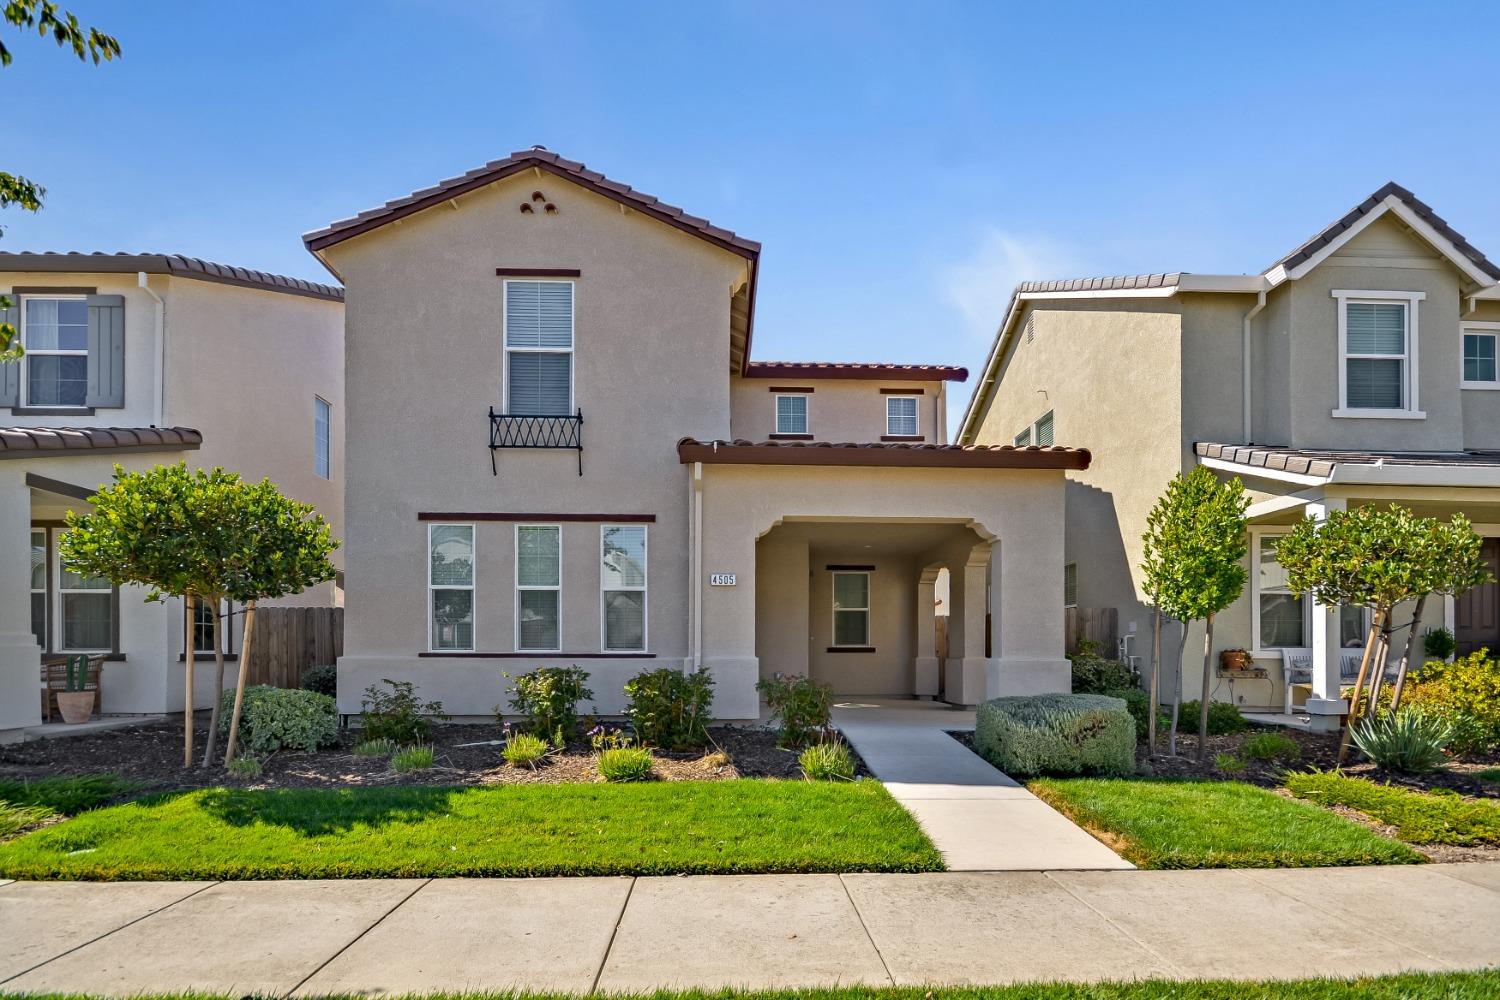 Natomas Meadows 2 story now available for you and your family. This property is charming! Walk up th